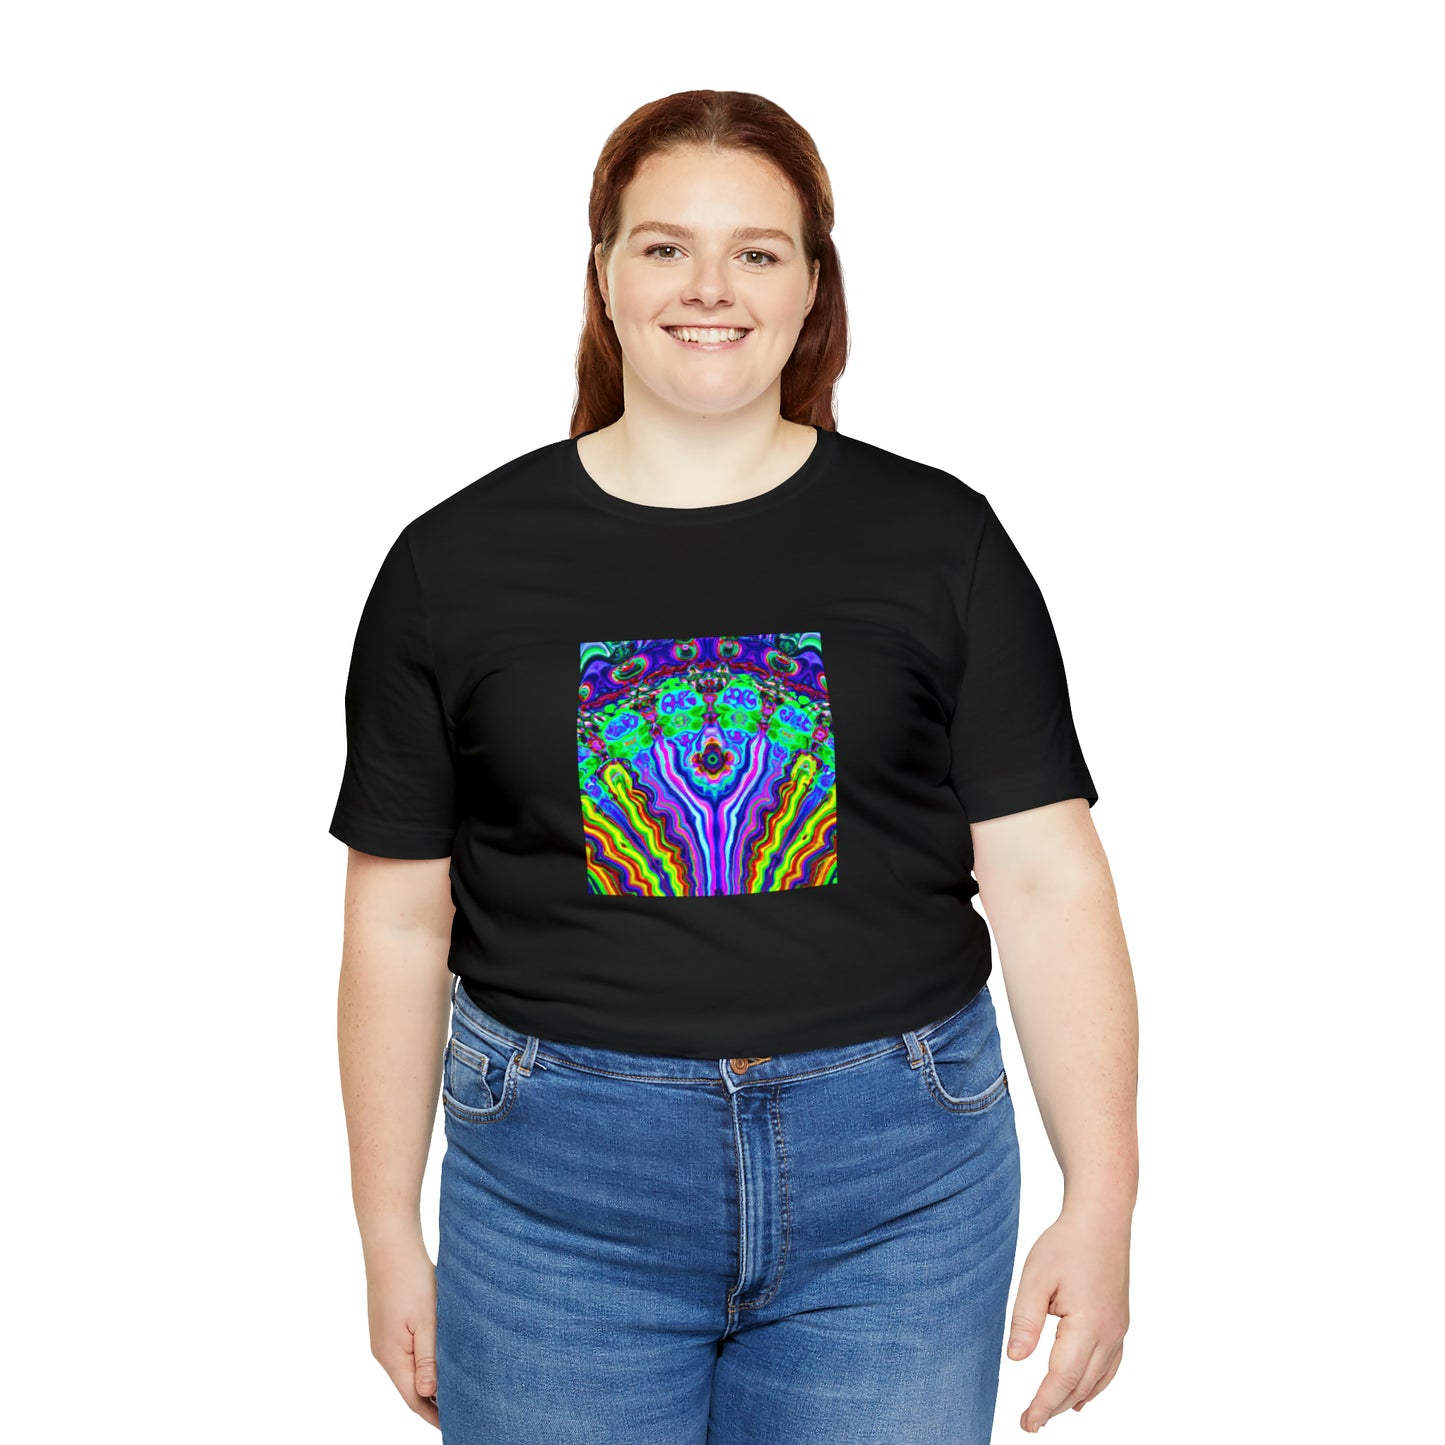 Victor "Vintage" Valentino - - Psychedelic Trippy Pattern Tee Shirt